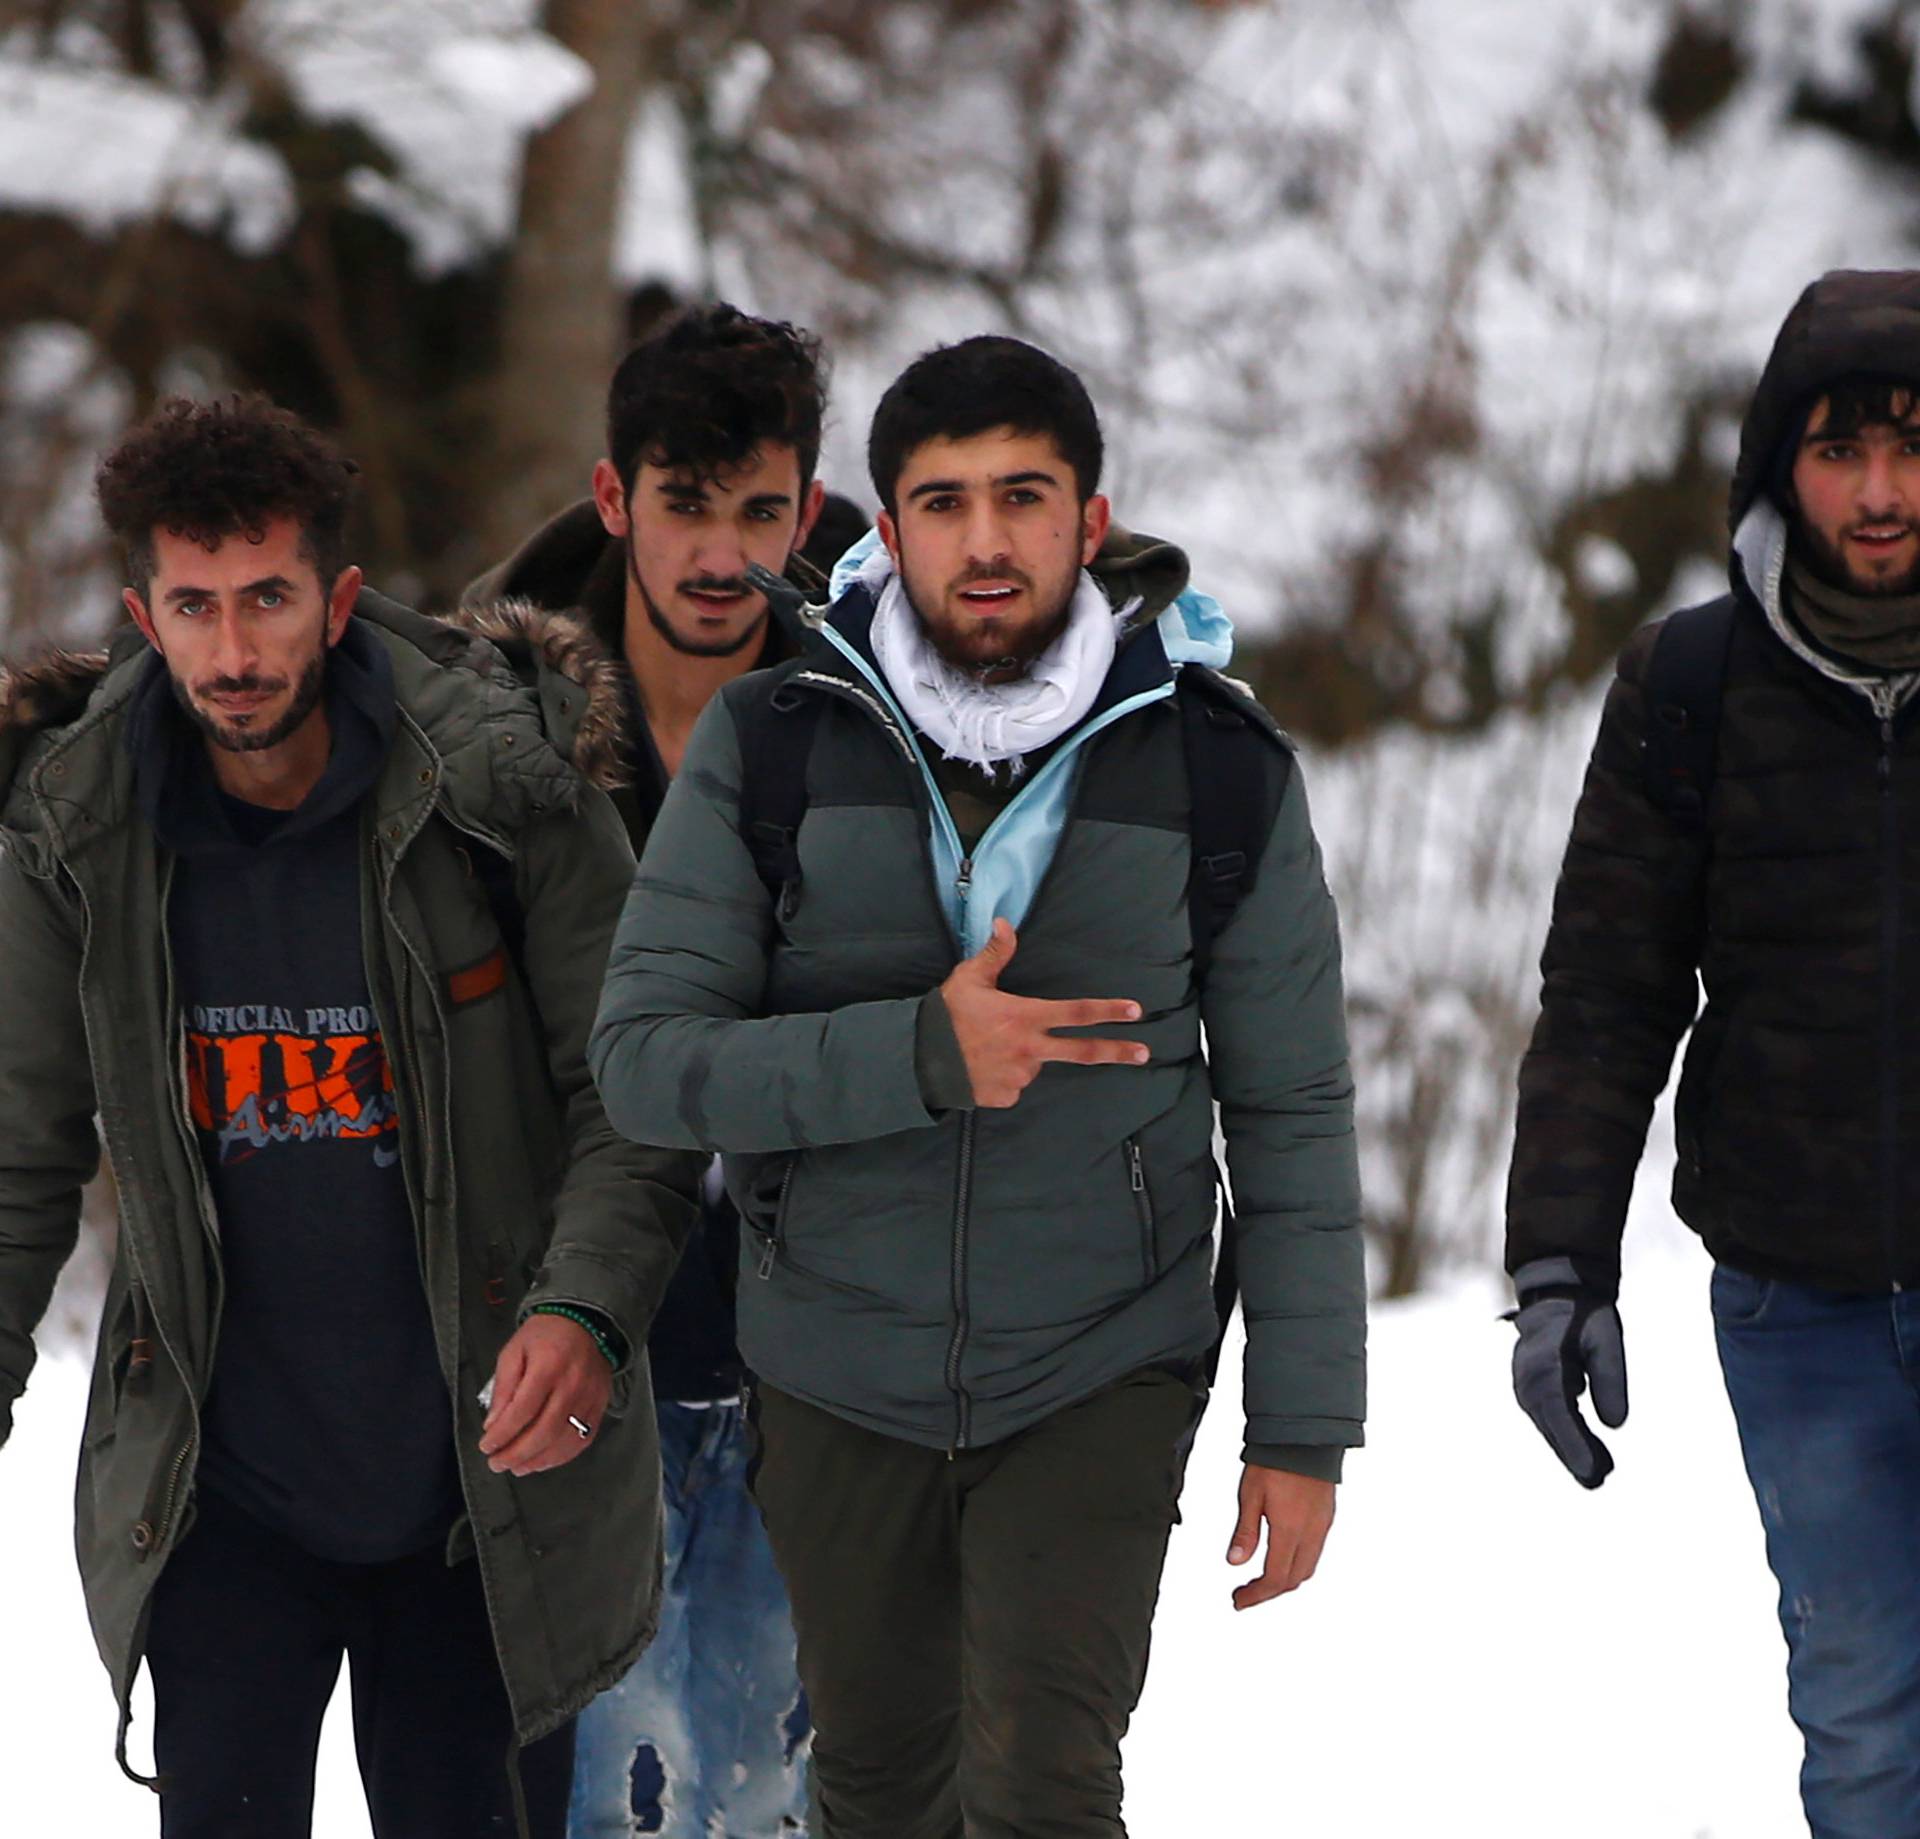 A group of migrants attempt sto illegally cross the border into Croatia on the Pljesevica Mountain near Bihac